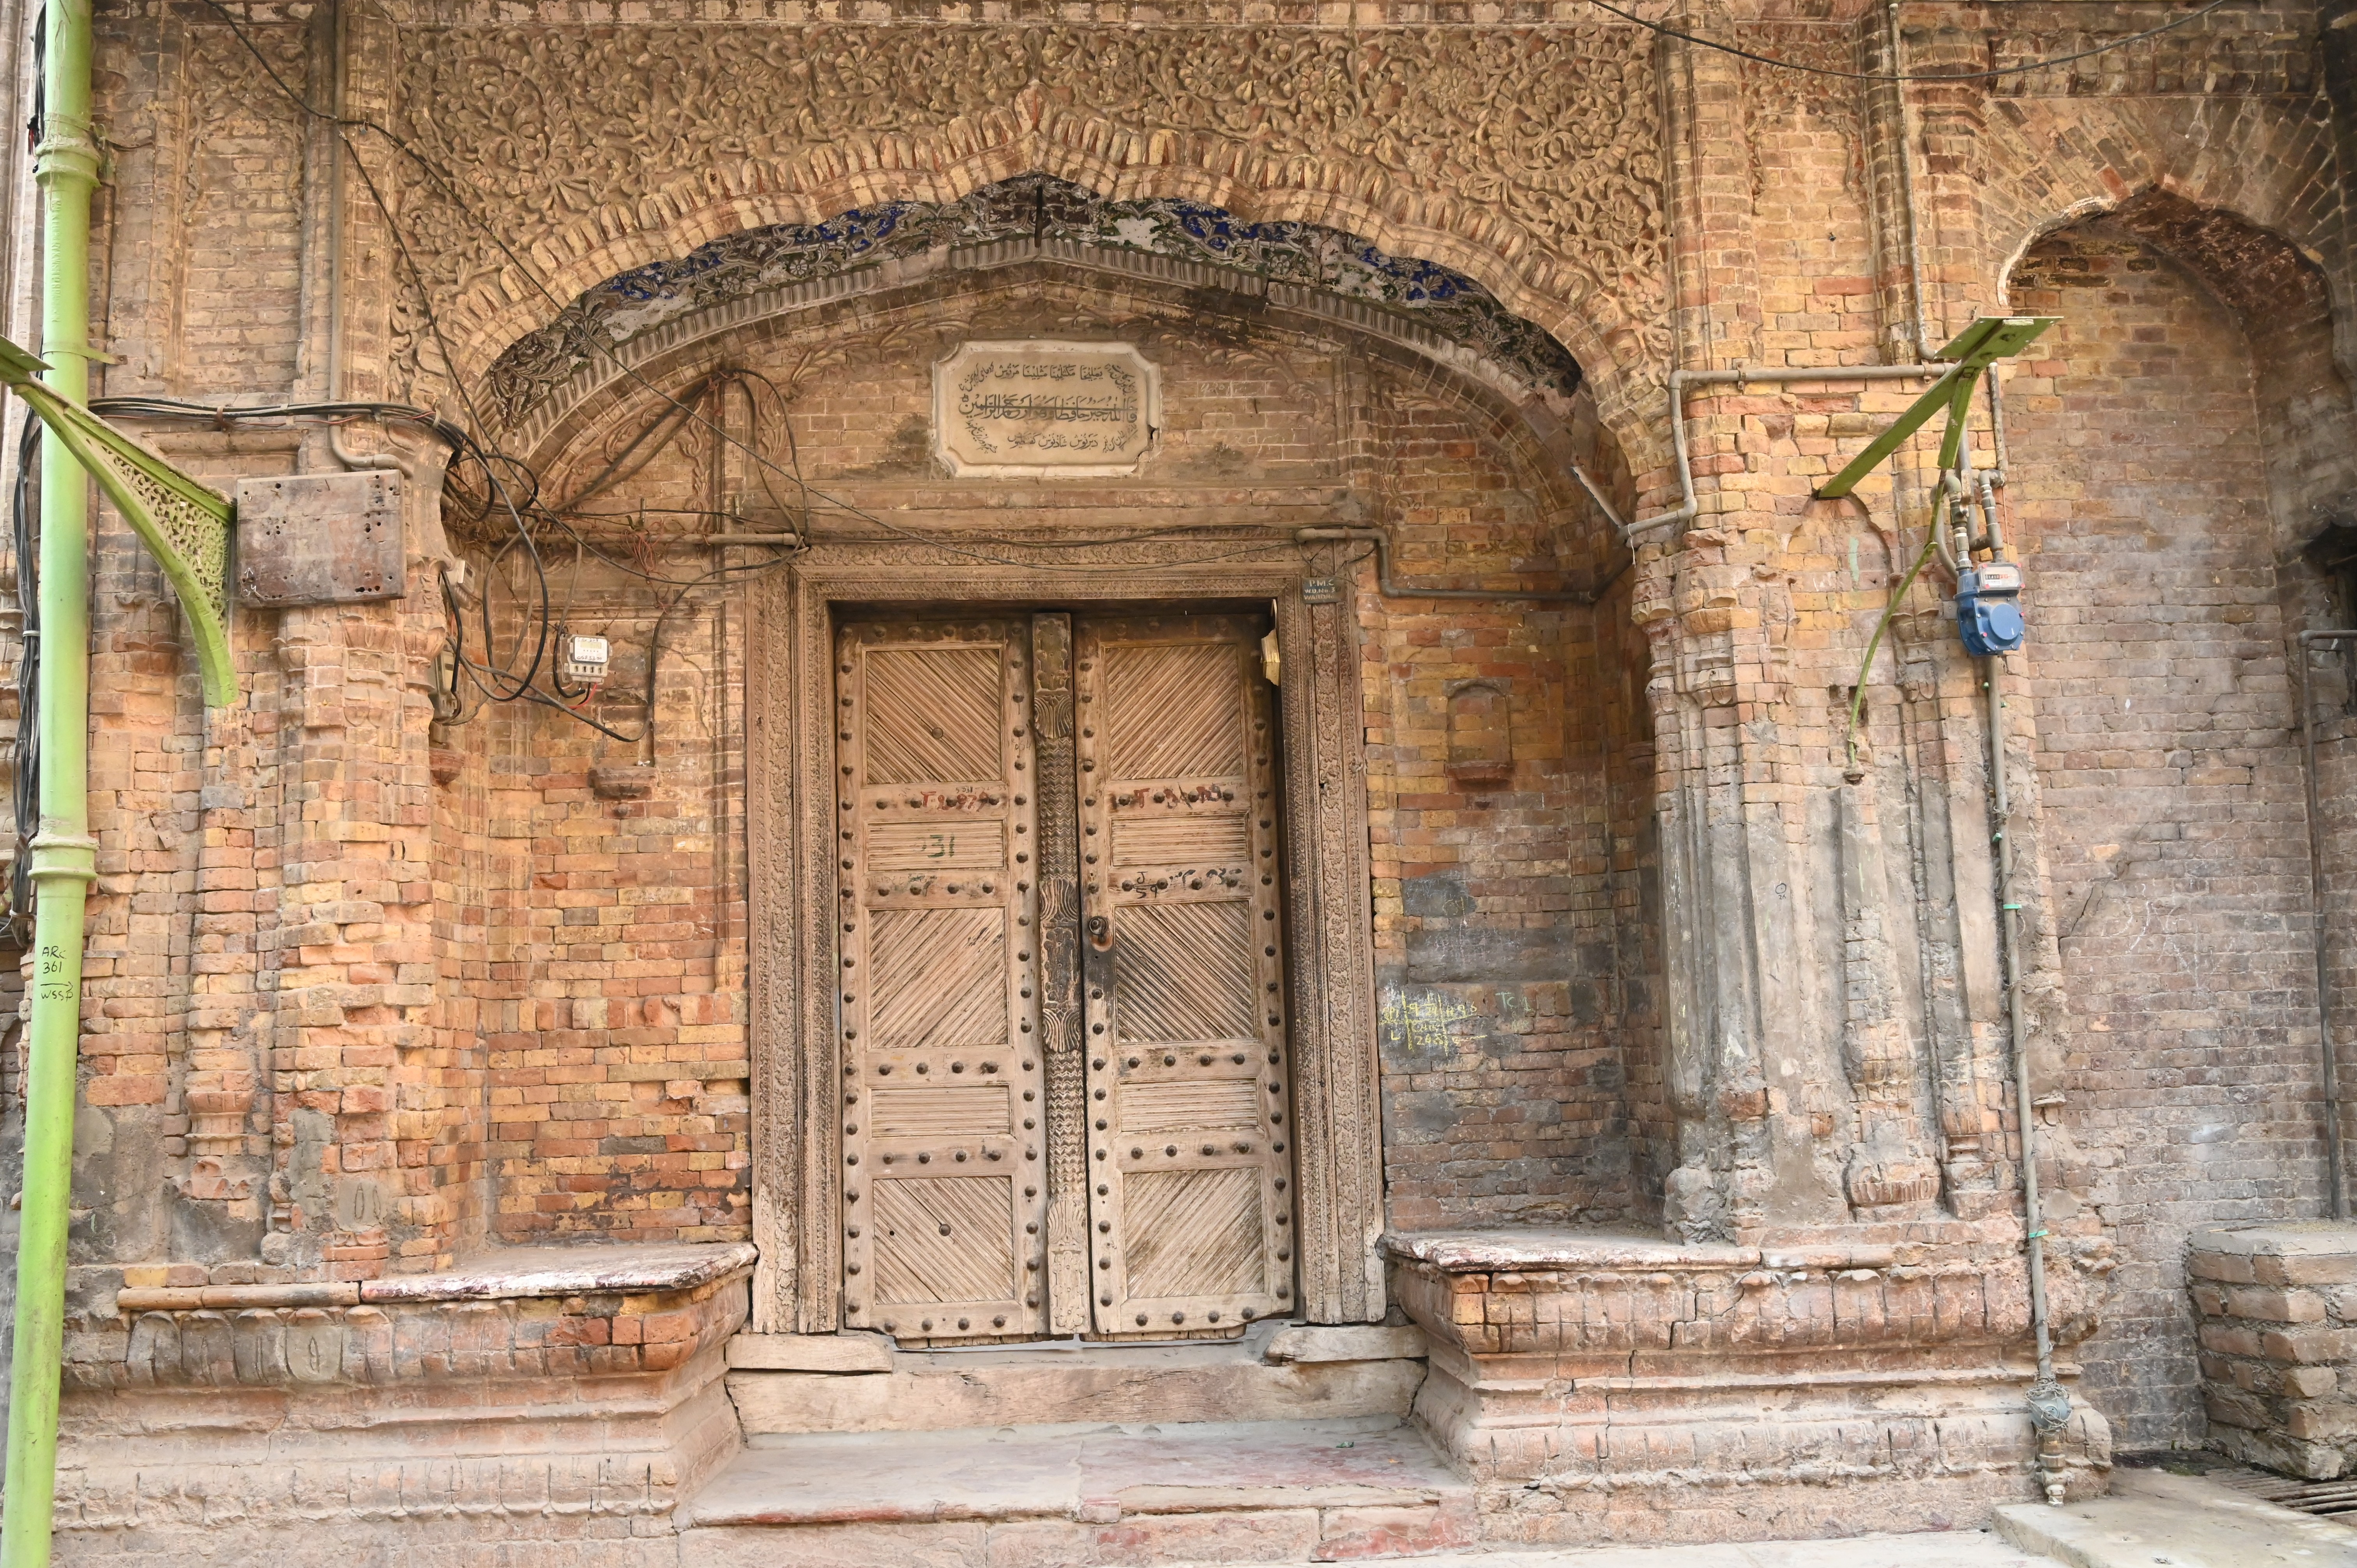 An old fashioned wooden house depicting the ancient culture of Peshawar